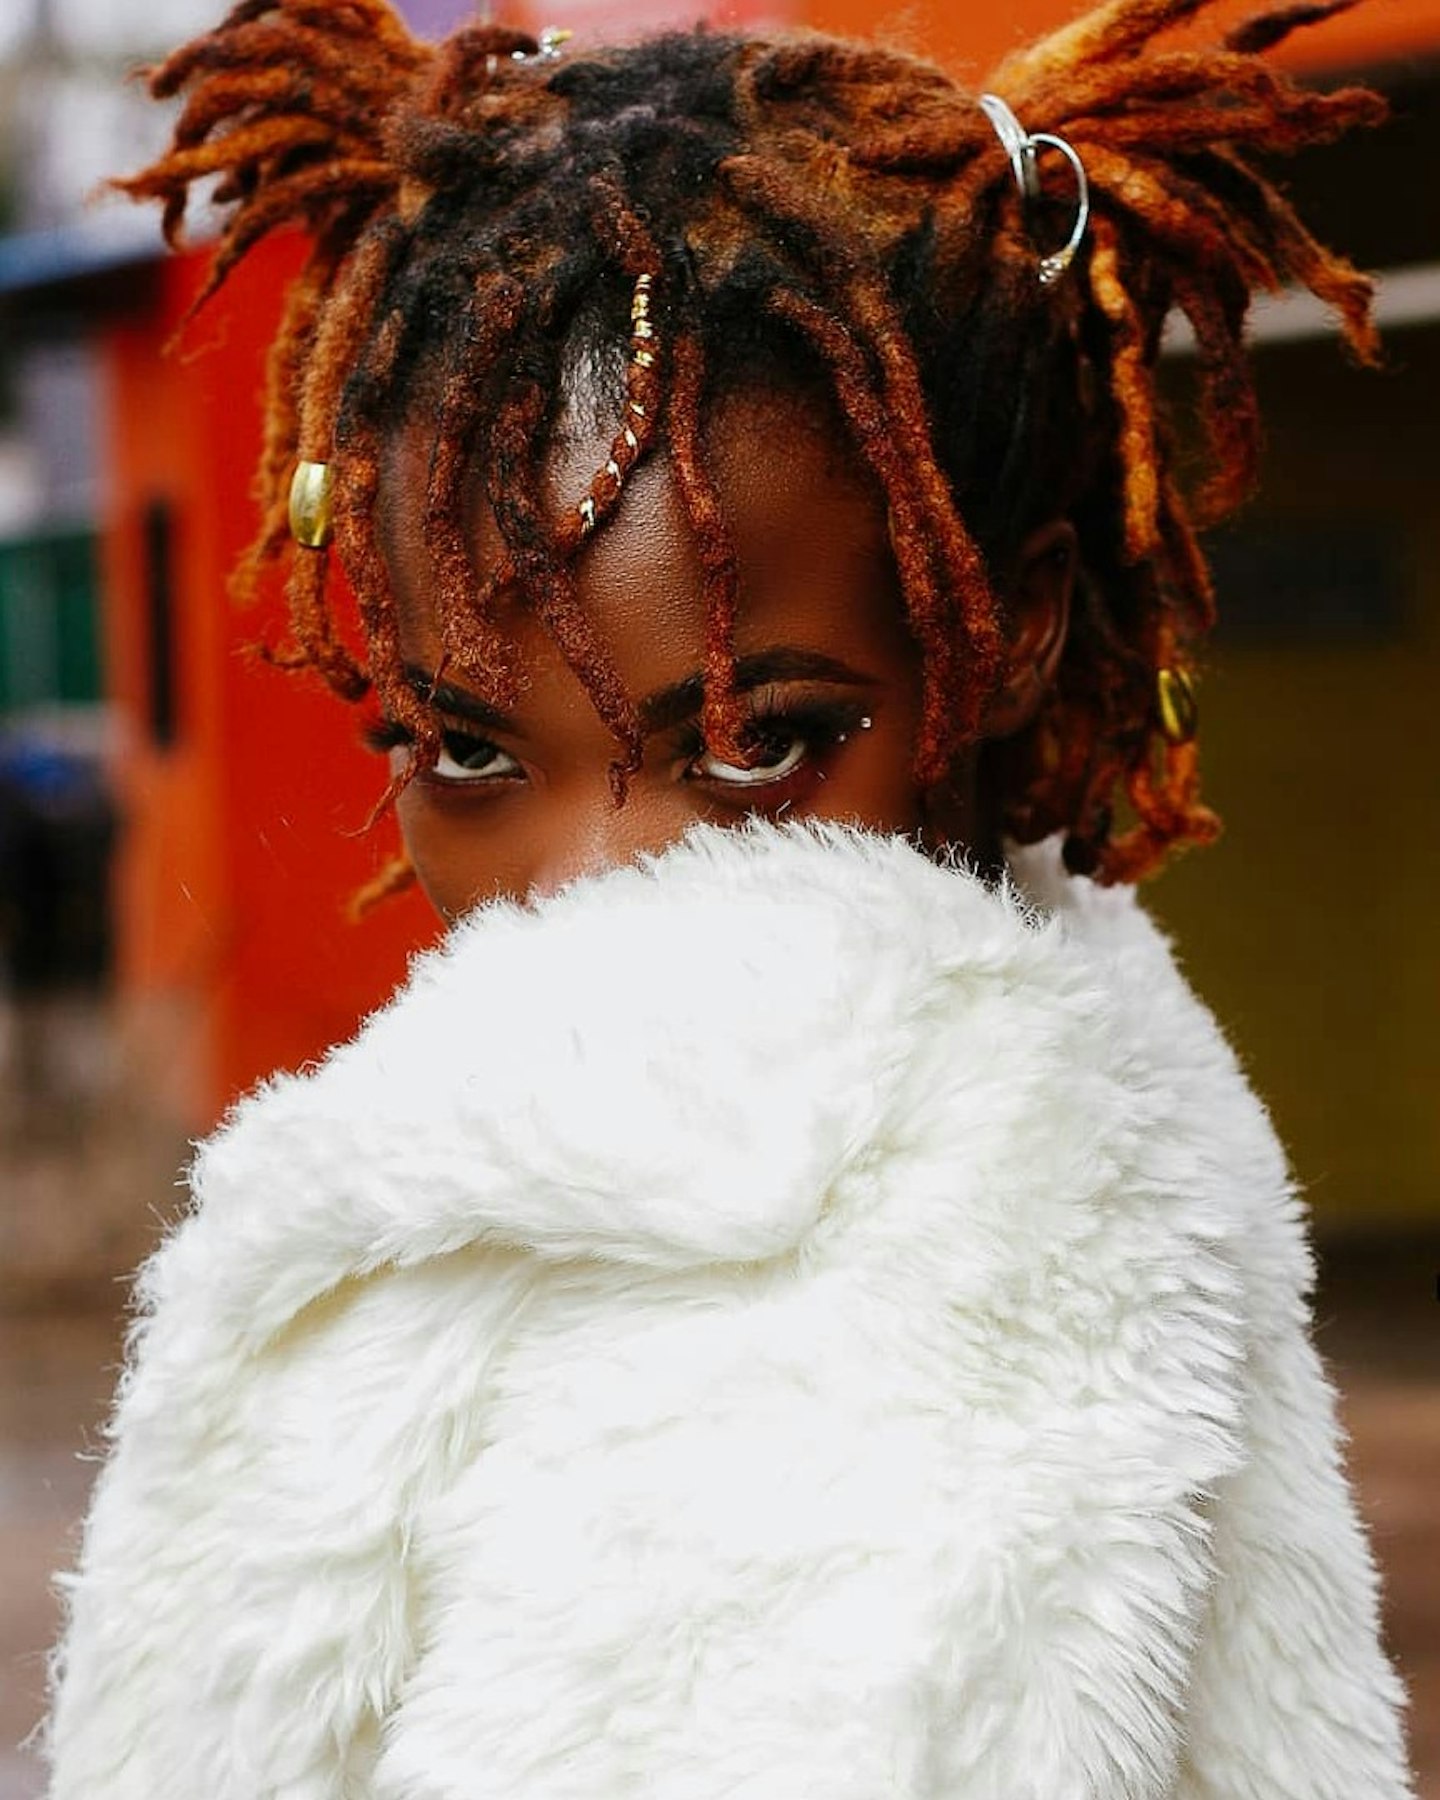 The Short Locs - Hairstyles for Short, Textured Afro Hair